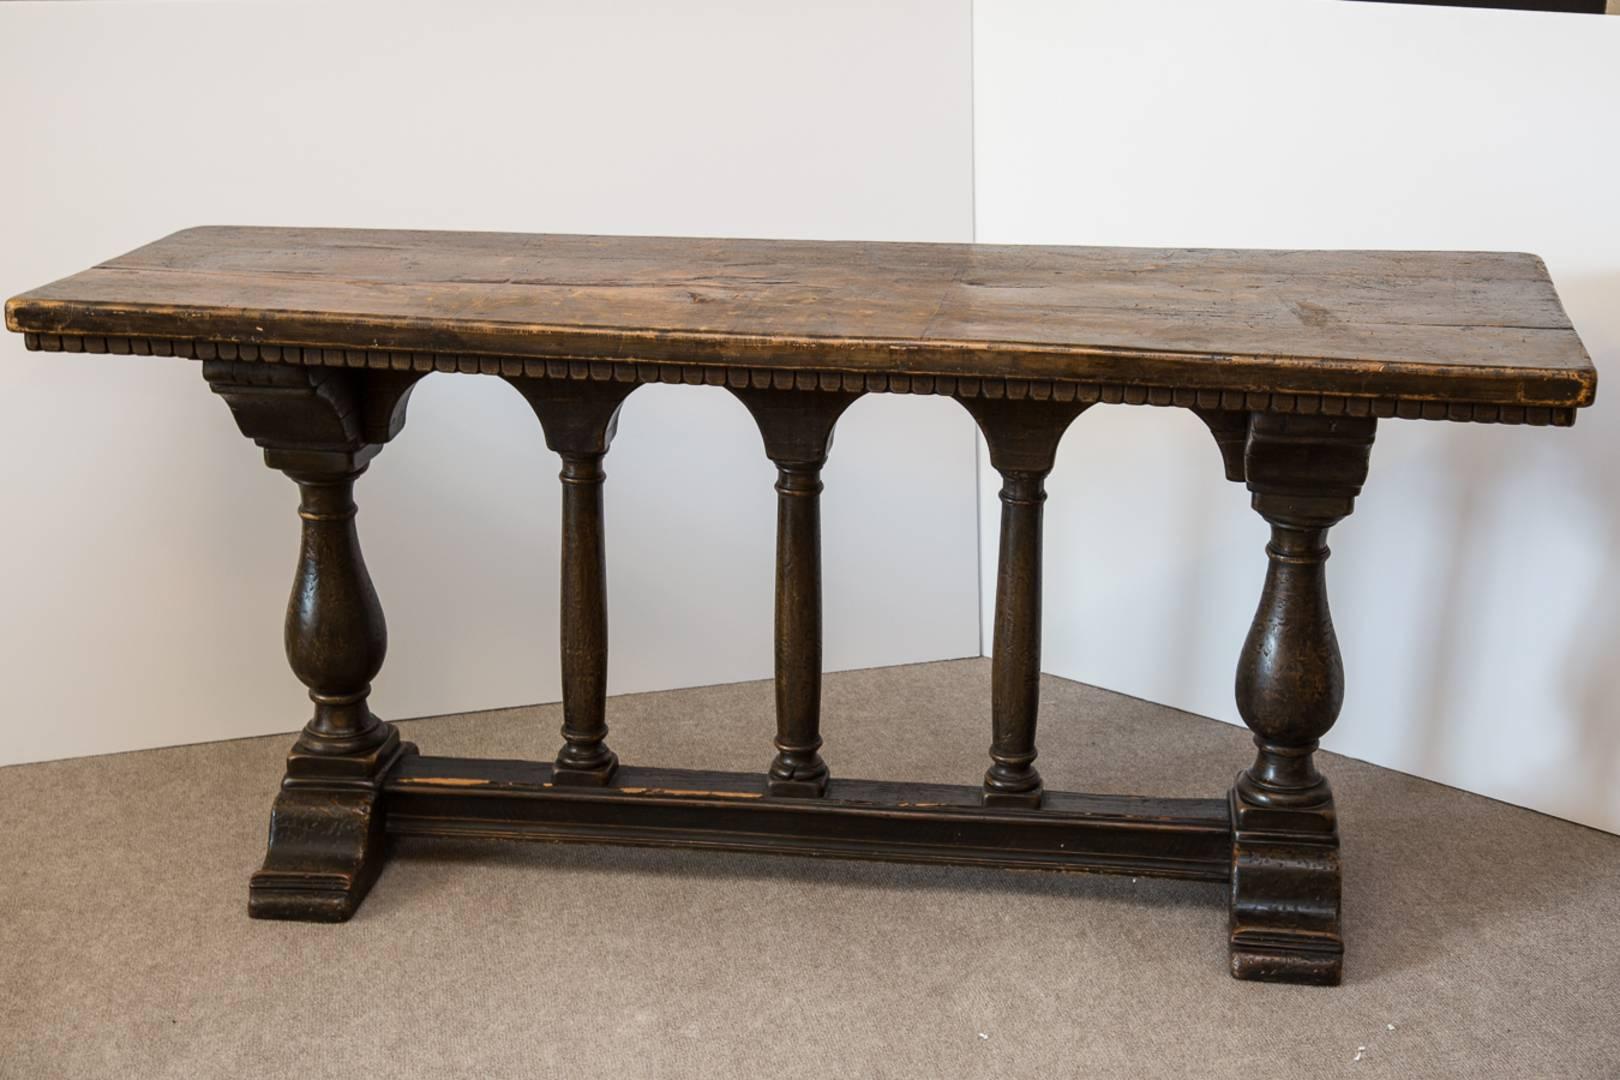 Rustic Italian Baroque style trestle table. 18th century top with early 20th century base.